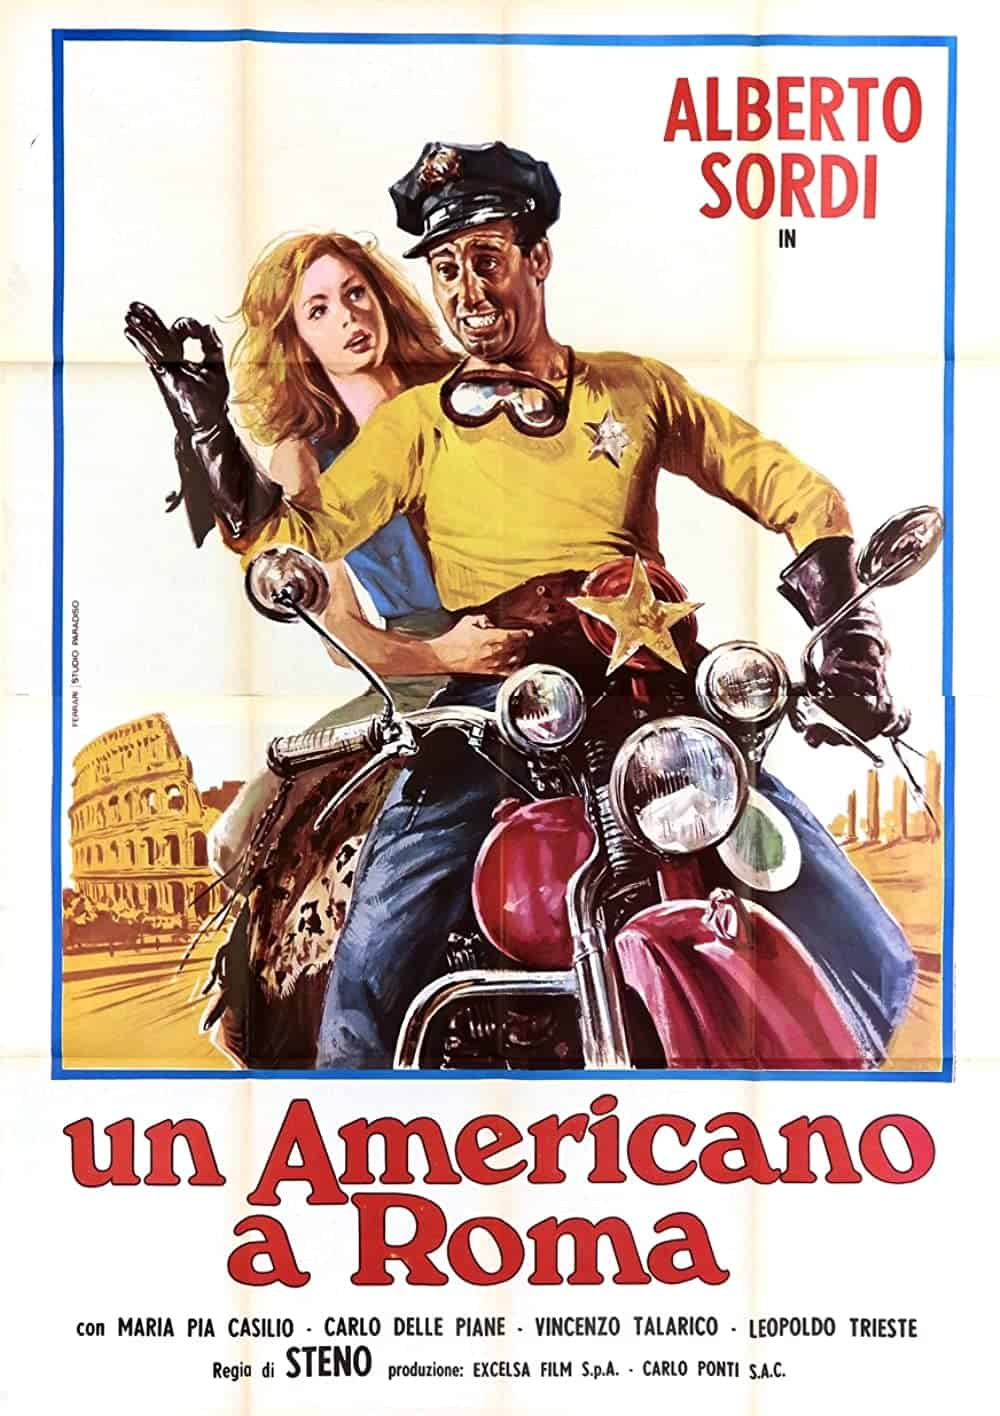 An American in Rome (1954) Best Movies About Rome to Watch and Re-Watch